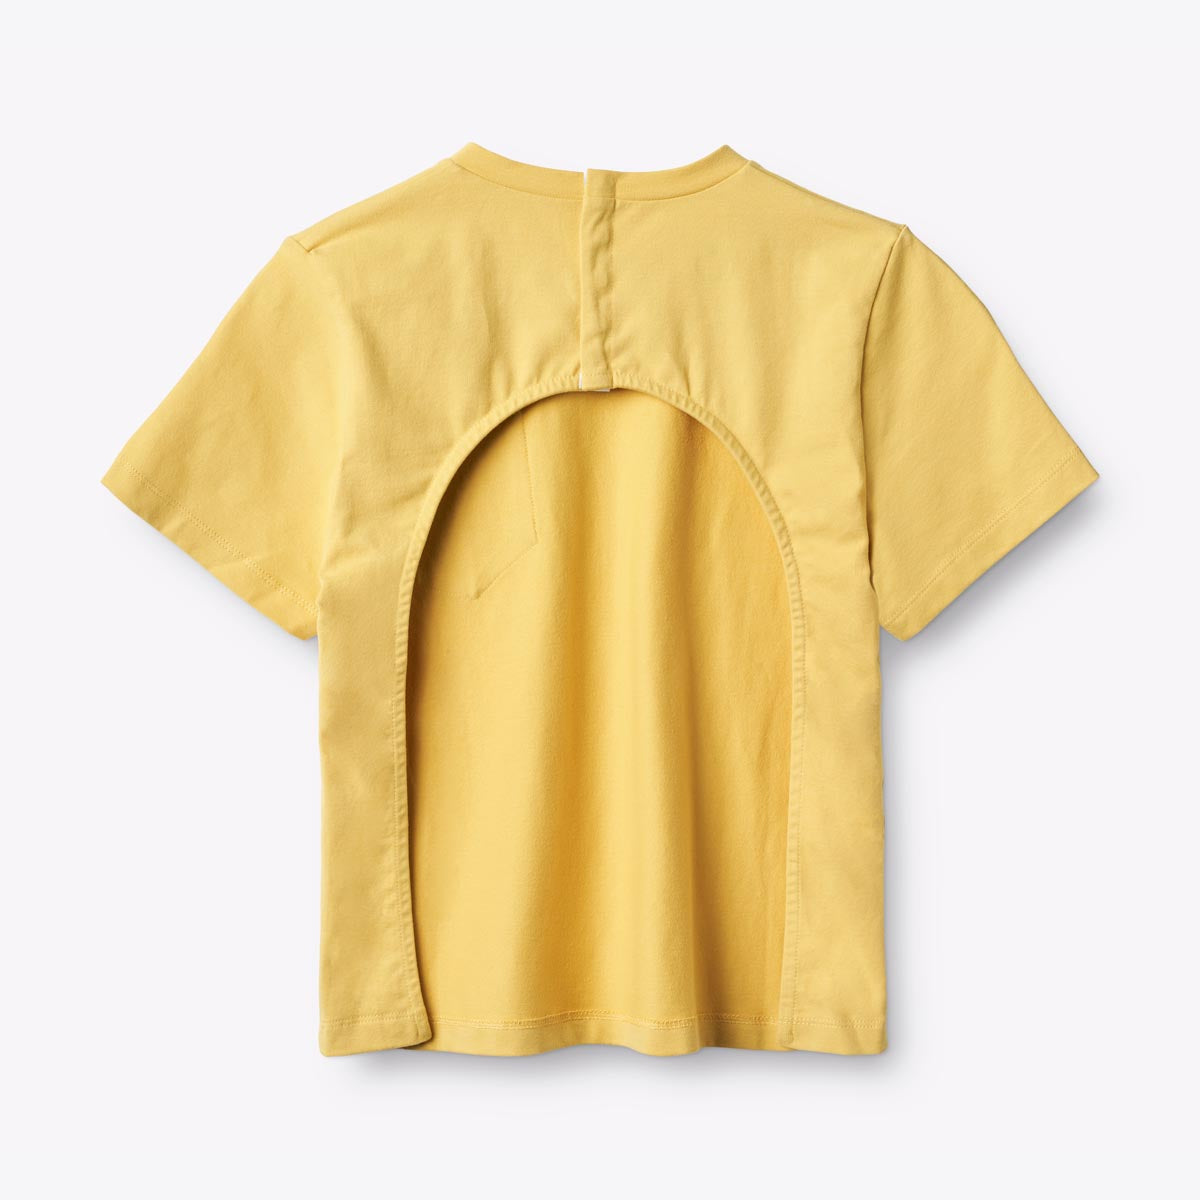 ABEL T-shirt for disabled children - Curry Yellow (open back for wheelchair users)